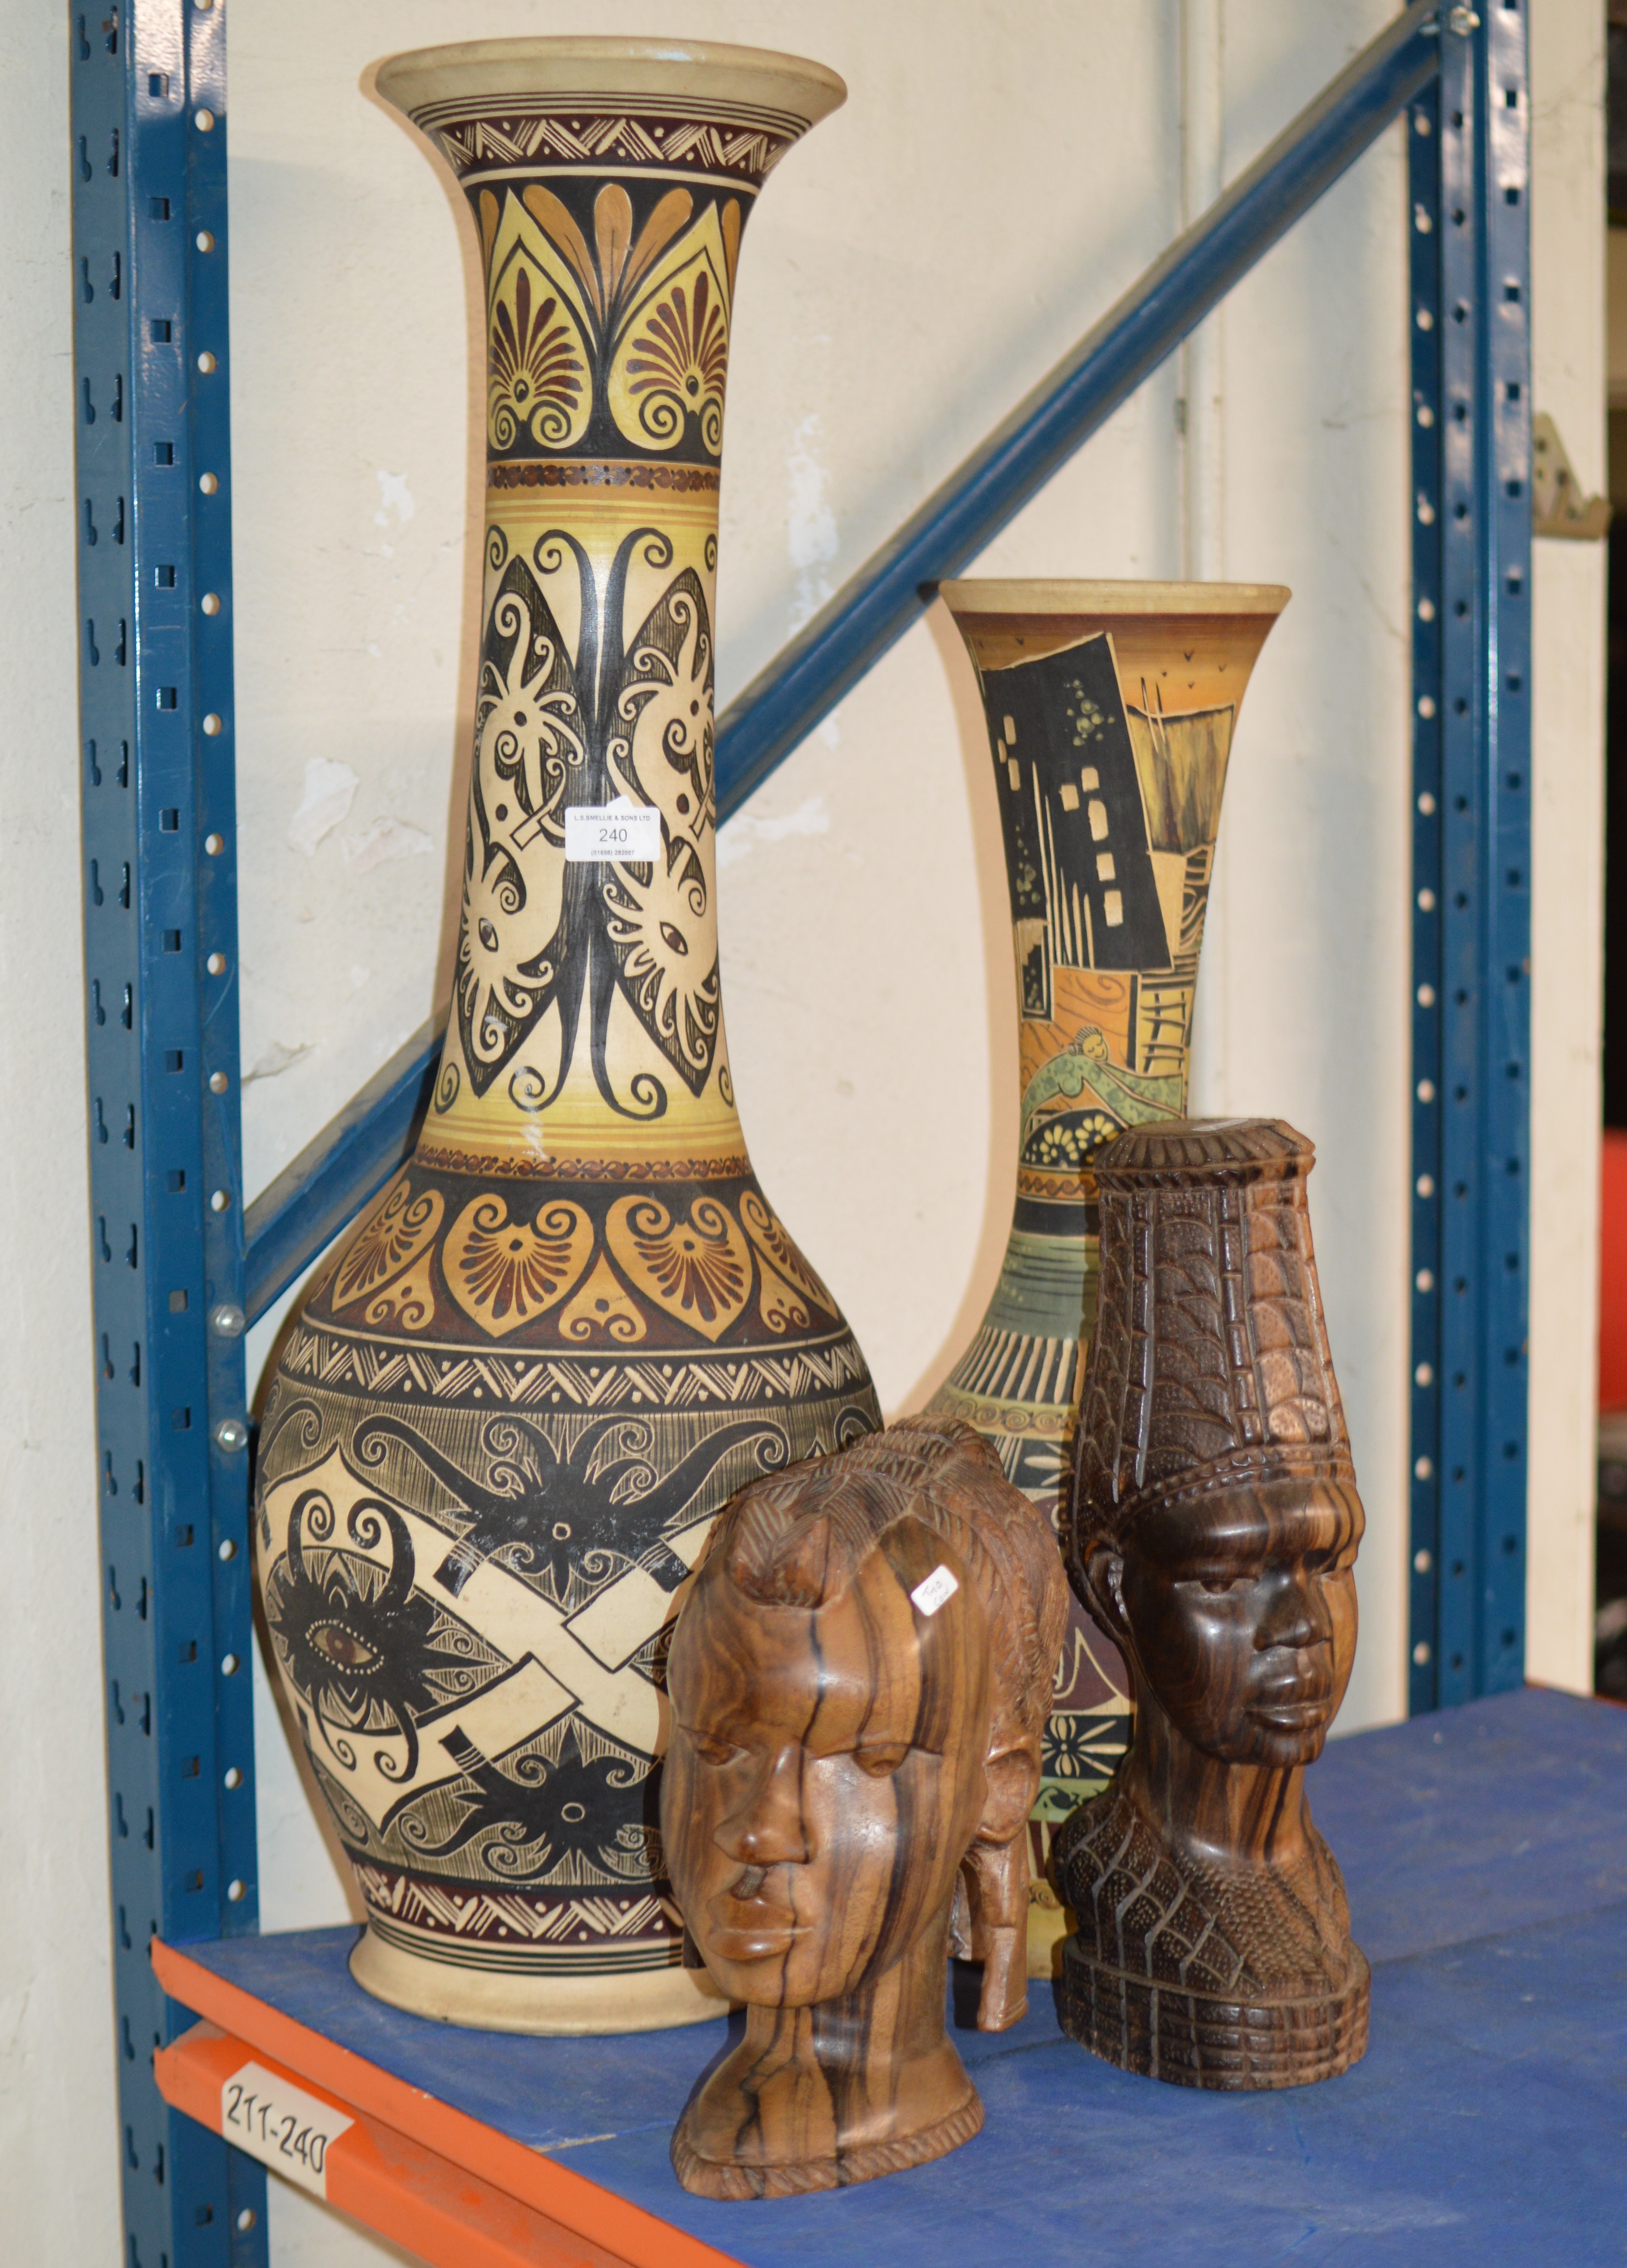 2 LARGE POTTERY VASES & 2 WOODEN AFRICAN STYLE BUST DISPLAYS